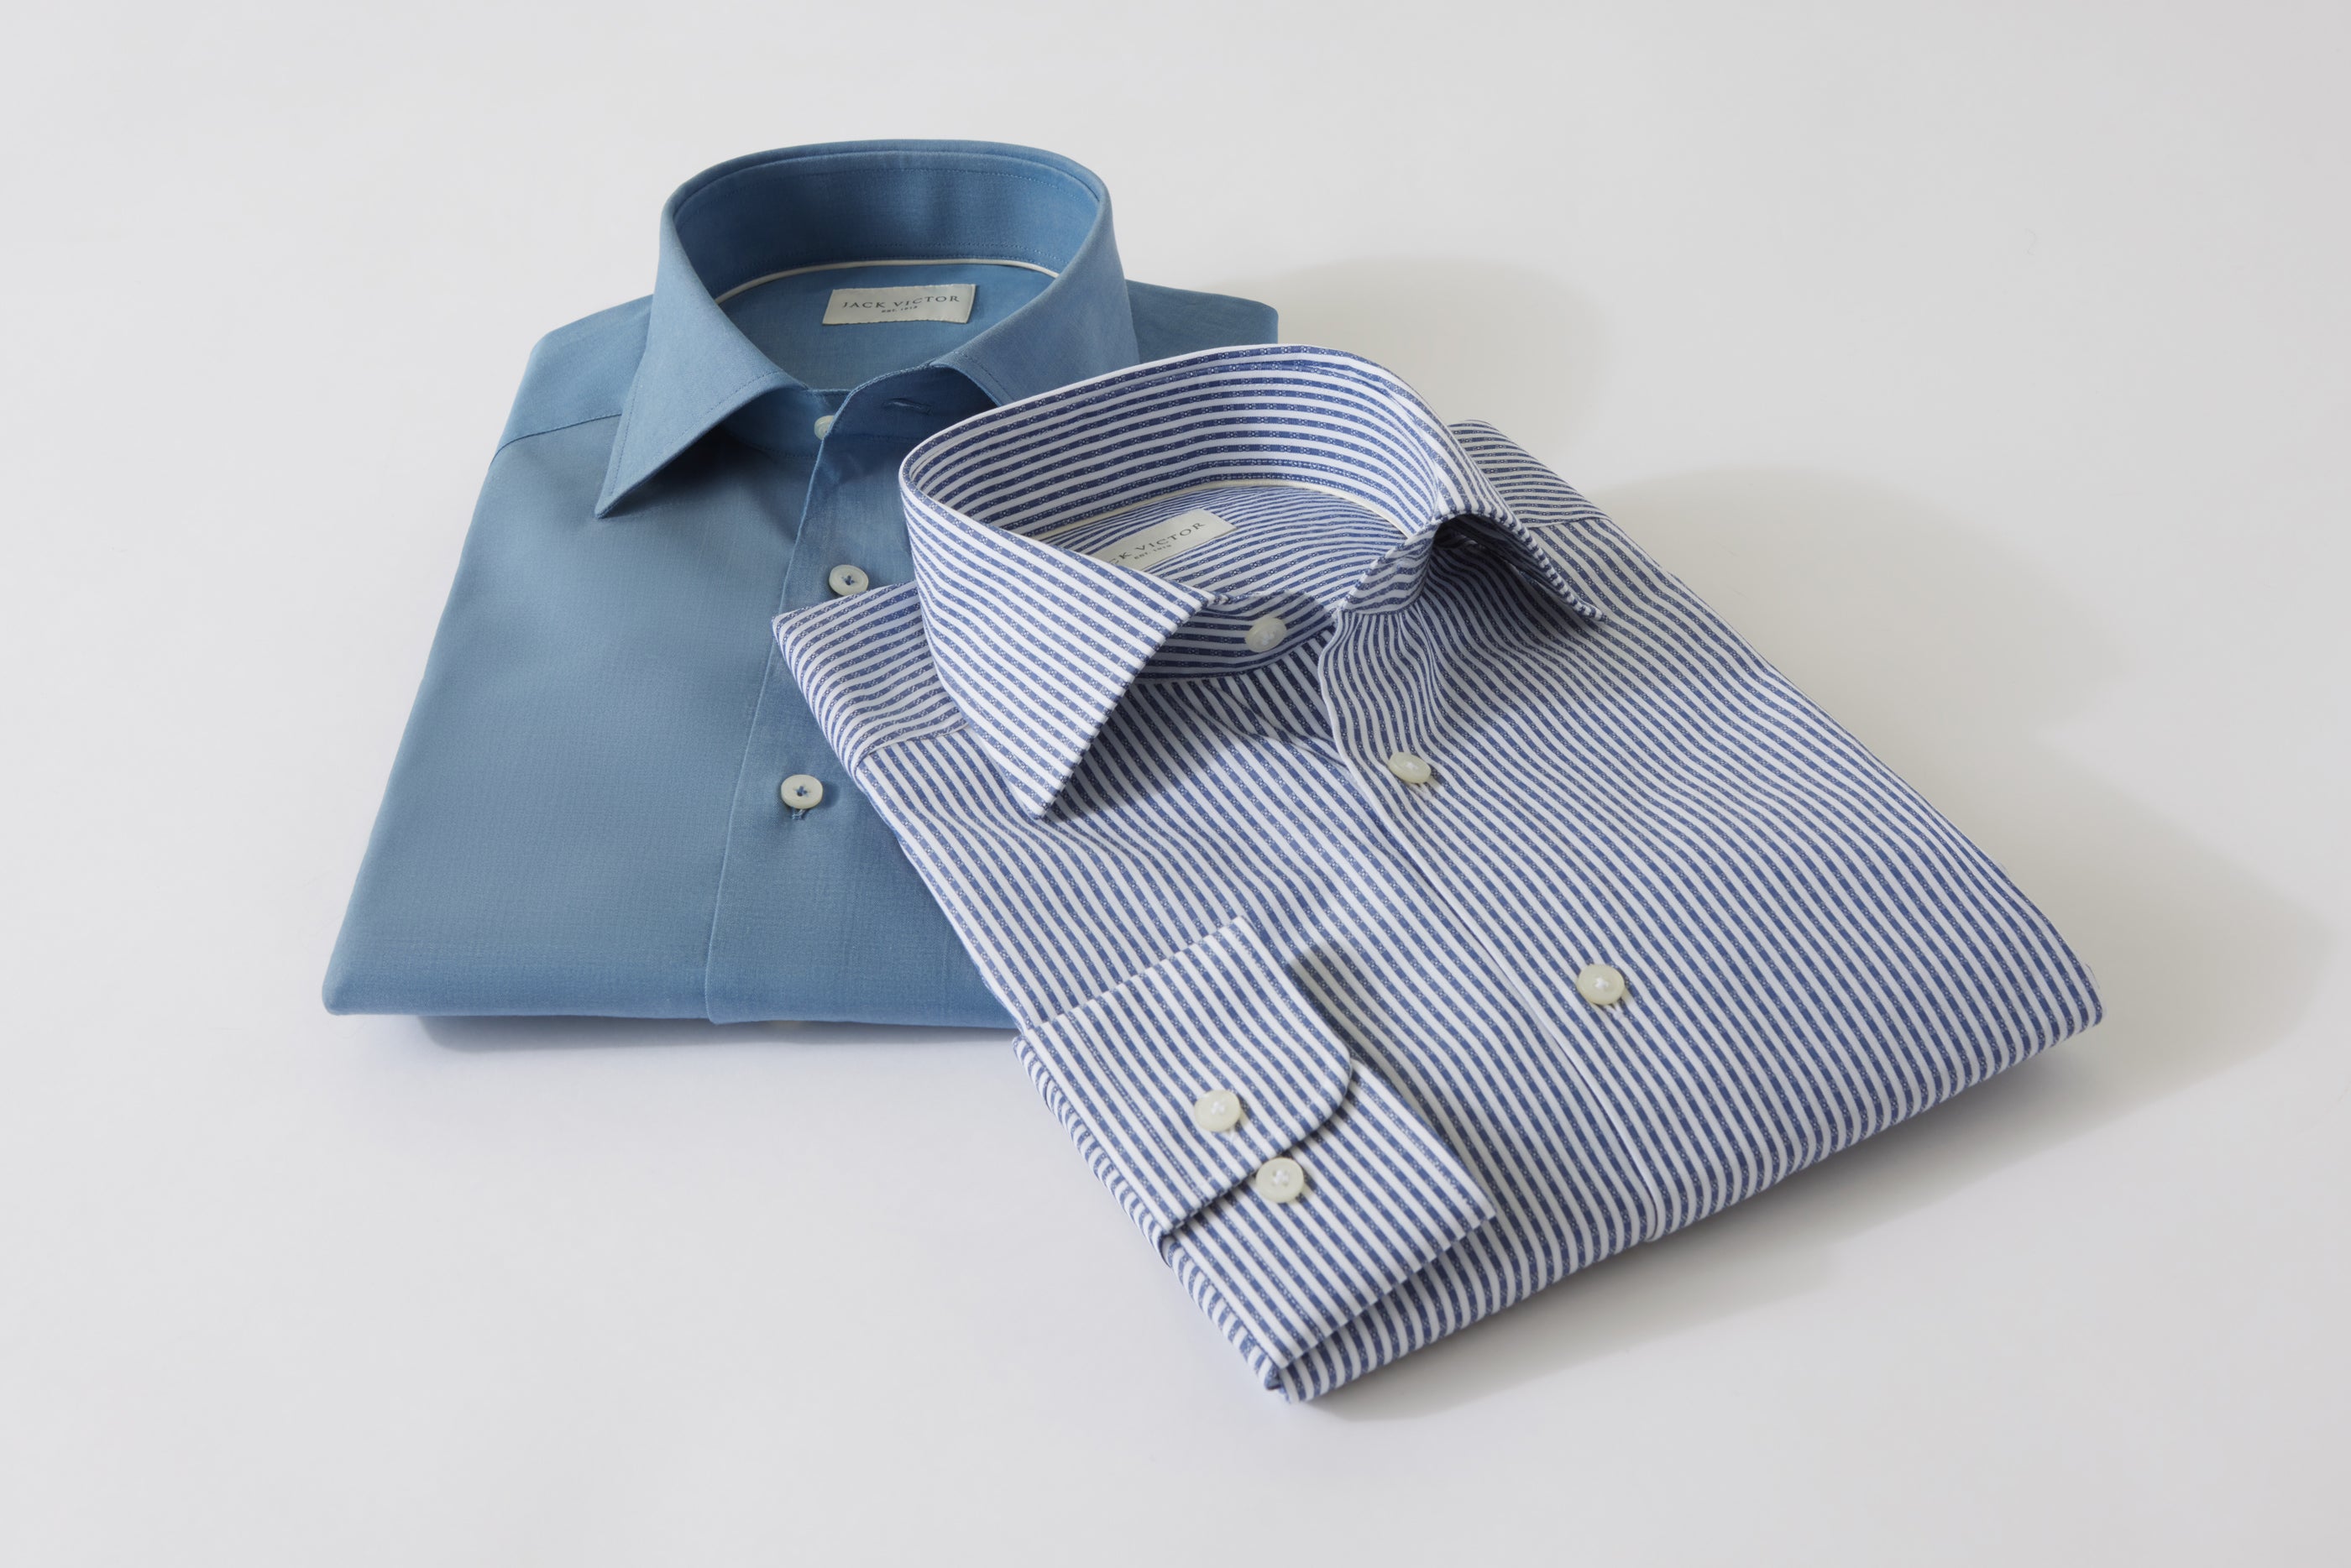 two different Jack victor colored folded sport shirts laying flat